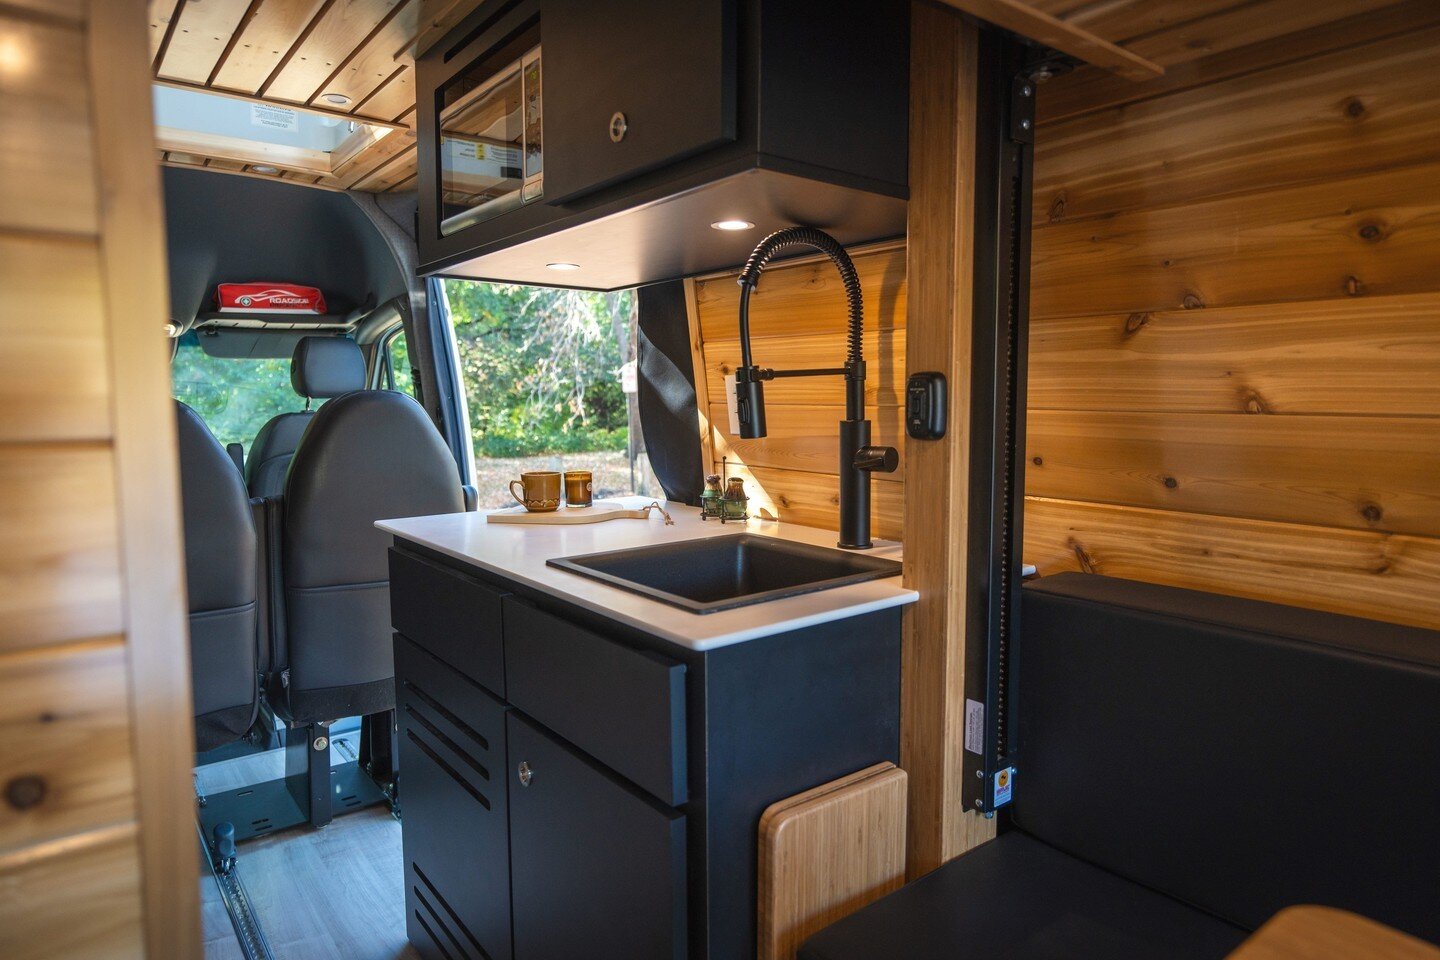 Searching for an exciting family or group adventure? Van Diesel is your perfect choice! Our newest rental accommodates up to five passengers and offers three separate beds. Imagine the unforgettable moments you and your family or friends can create o